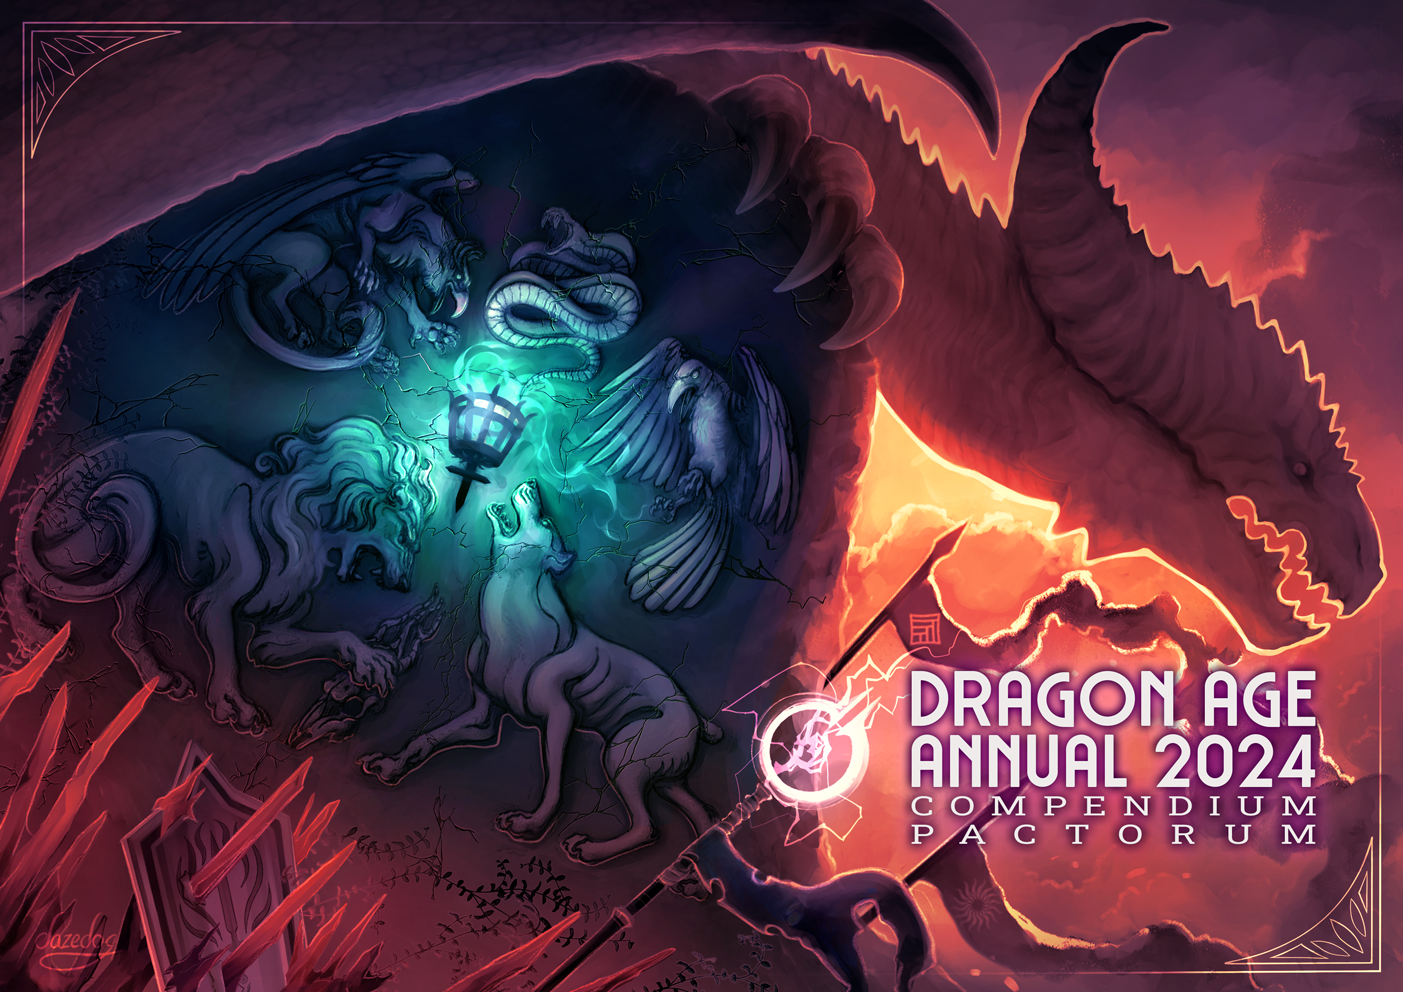 The front cover for the Dragon Age Annual 2024: Compendium Pactorum; the title is placed in the right front foreground in light purple-grey text and the letters have a faded neon-like vibrant purple glow. In the background, a dragon facing the right side of the image looms above a large stone, its claw curling around it. The stone contains carvings of animals representing the countries of Thedas arranged around a veilfire torch bathing the stone in teal light. From upper left circling around to bottom right the animals are: griffin for Anderfels, snake for Tevinter, crow for Antiva, Mabari for Ferelden, and lion for Orlais. The rest of the image is cast in vibrant orange, pink, and yellow from a rising or setting sun which is positioned behind the dragon, the light is reflected in the background on cumulus clouds which add texture to the image. In the foreground discarded on the ground as if left from battle there is a Templar shield and a mage staff; the mage staff is casing very light yellow lightning in the shape of the Circle of Magi symbol. In the midground, to the right of the stone, under the dragon's head, and framing the title are two red banners - one with the Qun symbol and the other with the Chantry symbol. In the upper left and lower right corner there are two art deco style adornments in a metallic sheen used to frame the picture.